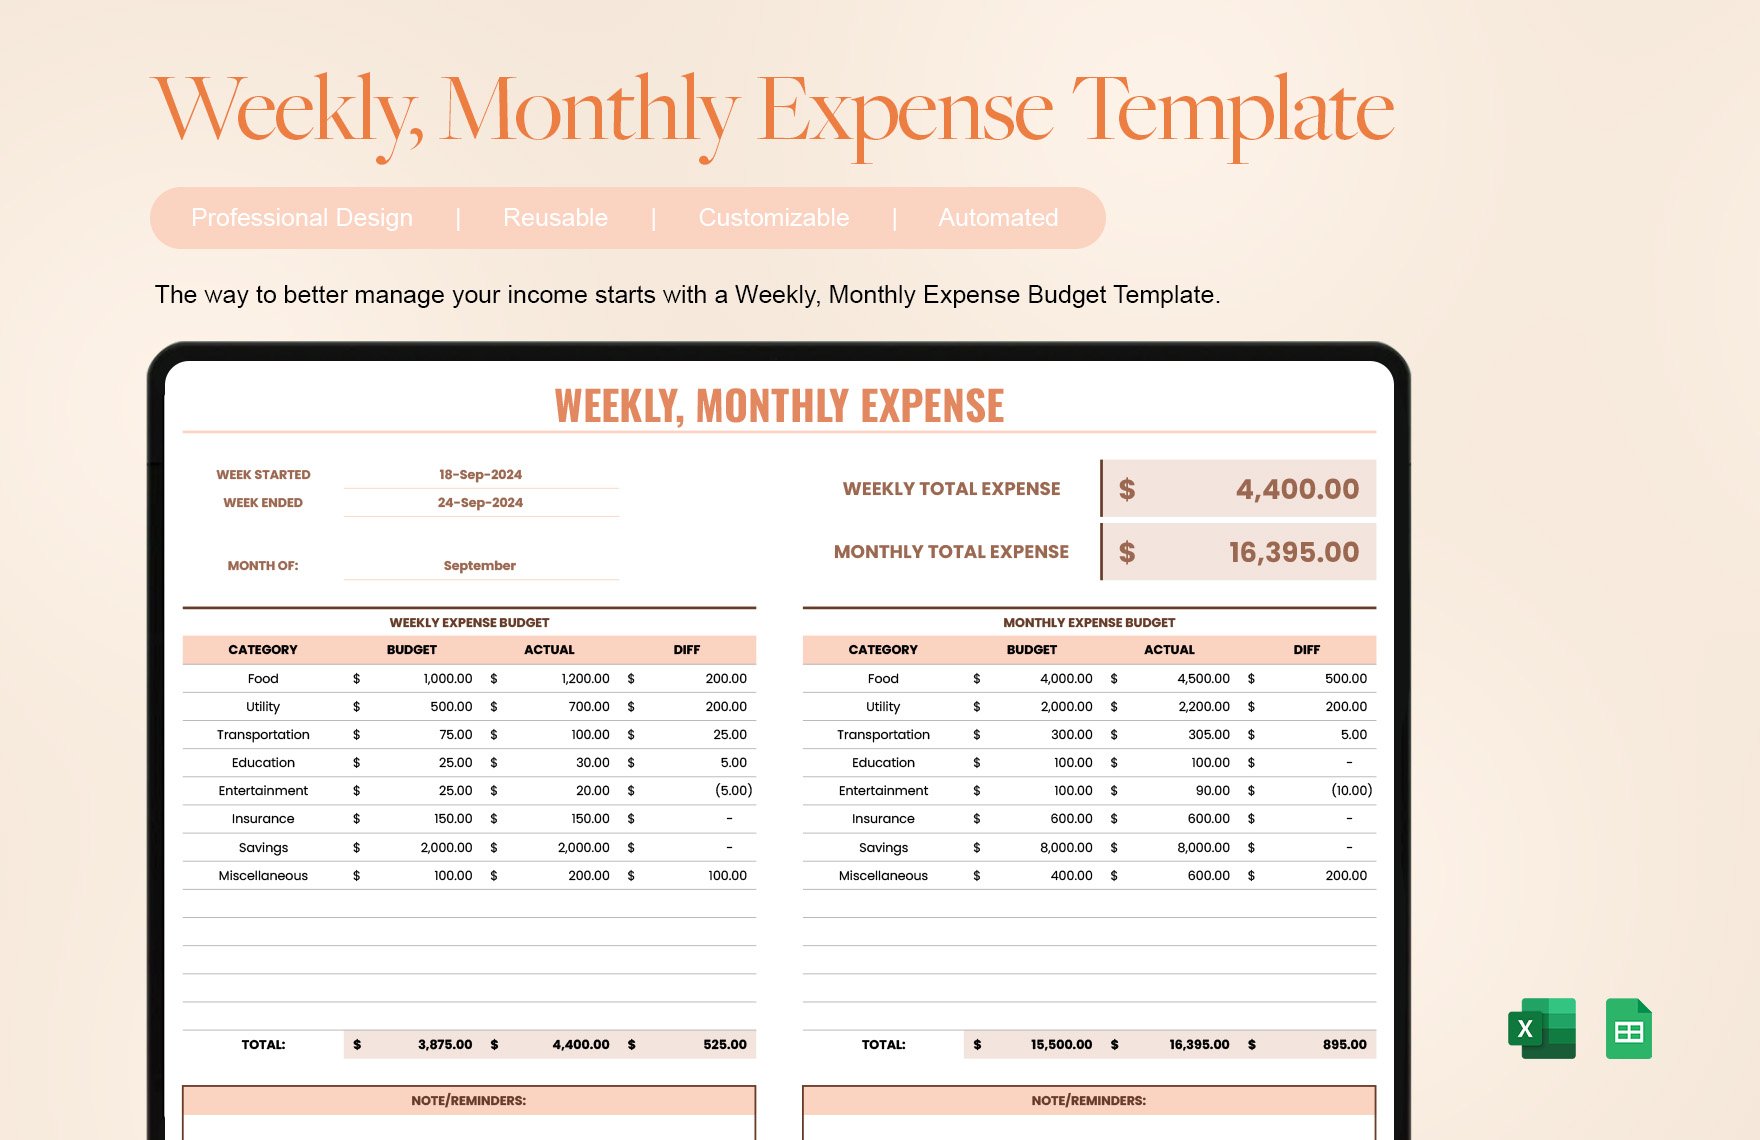 Free Weekly, Monthly Expense Template